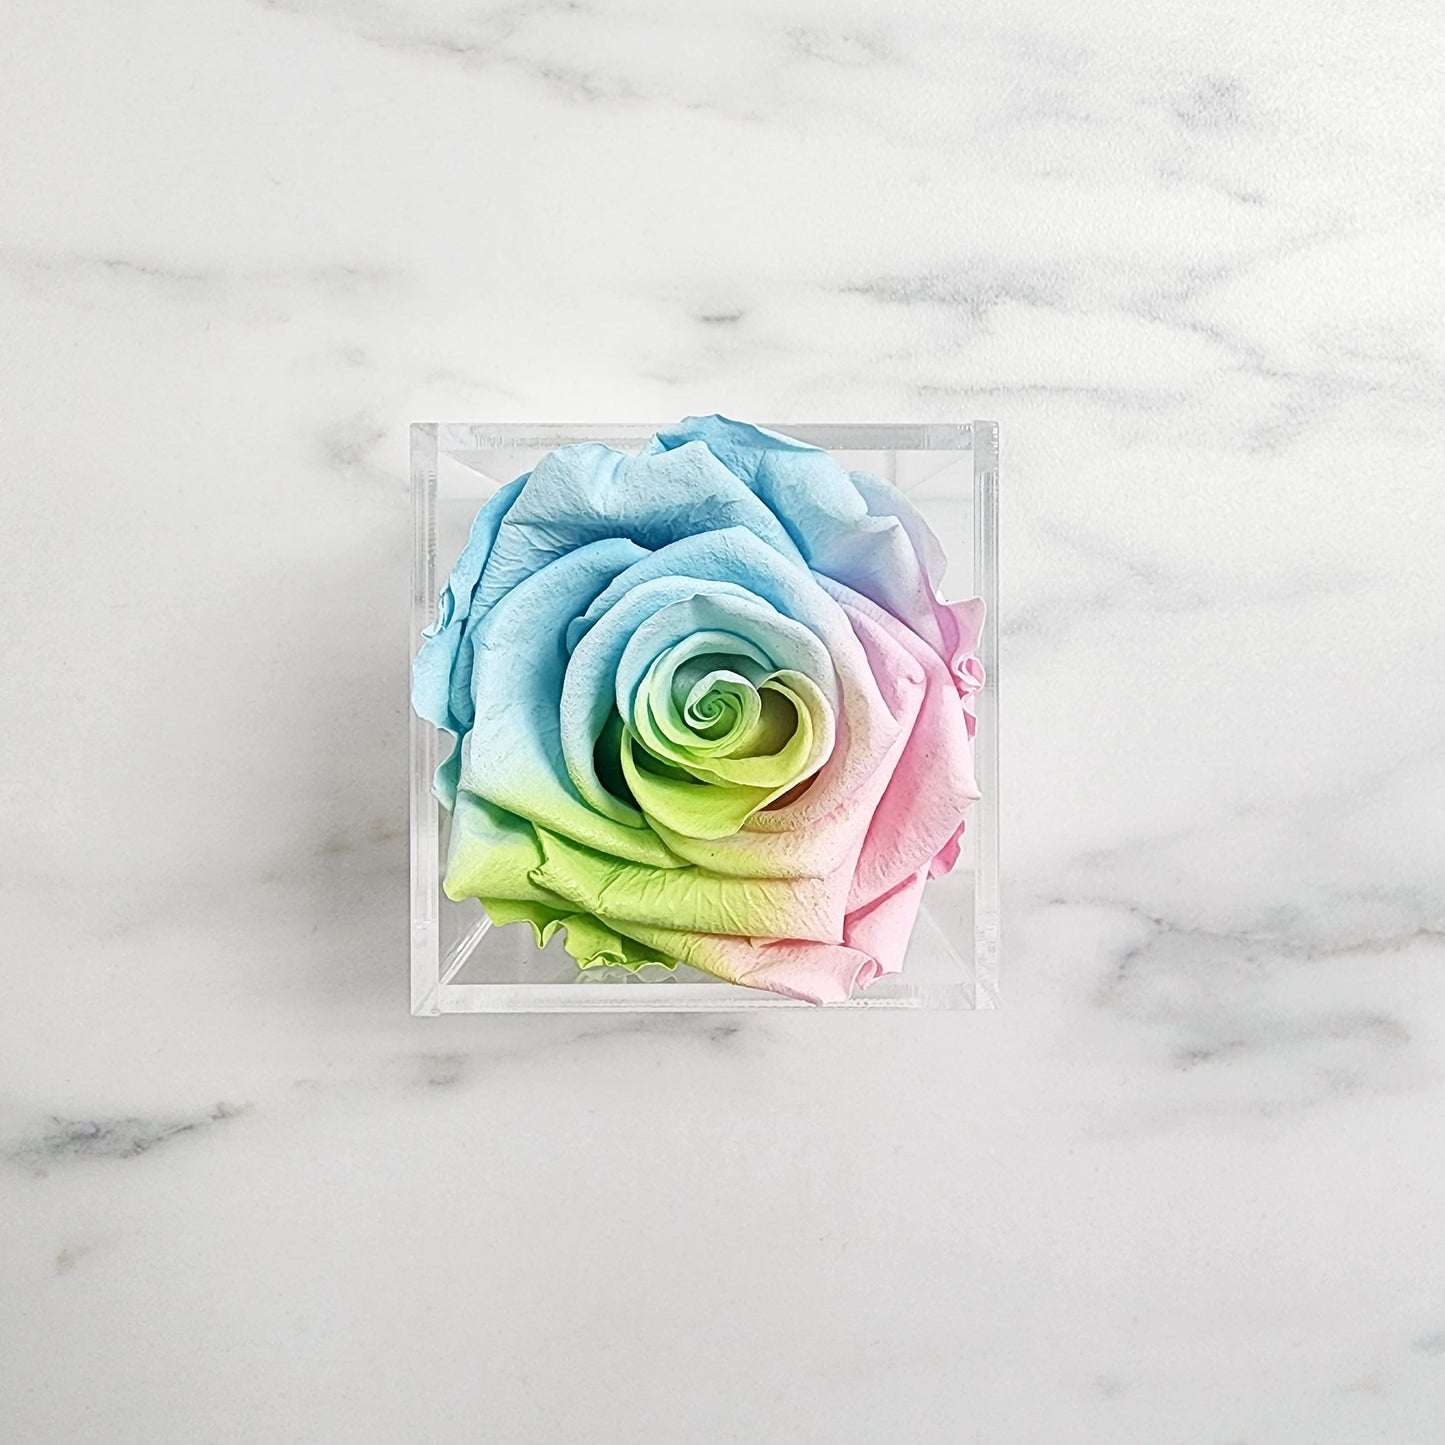 Preserved Roses | Single Rose Head Only